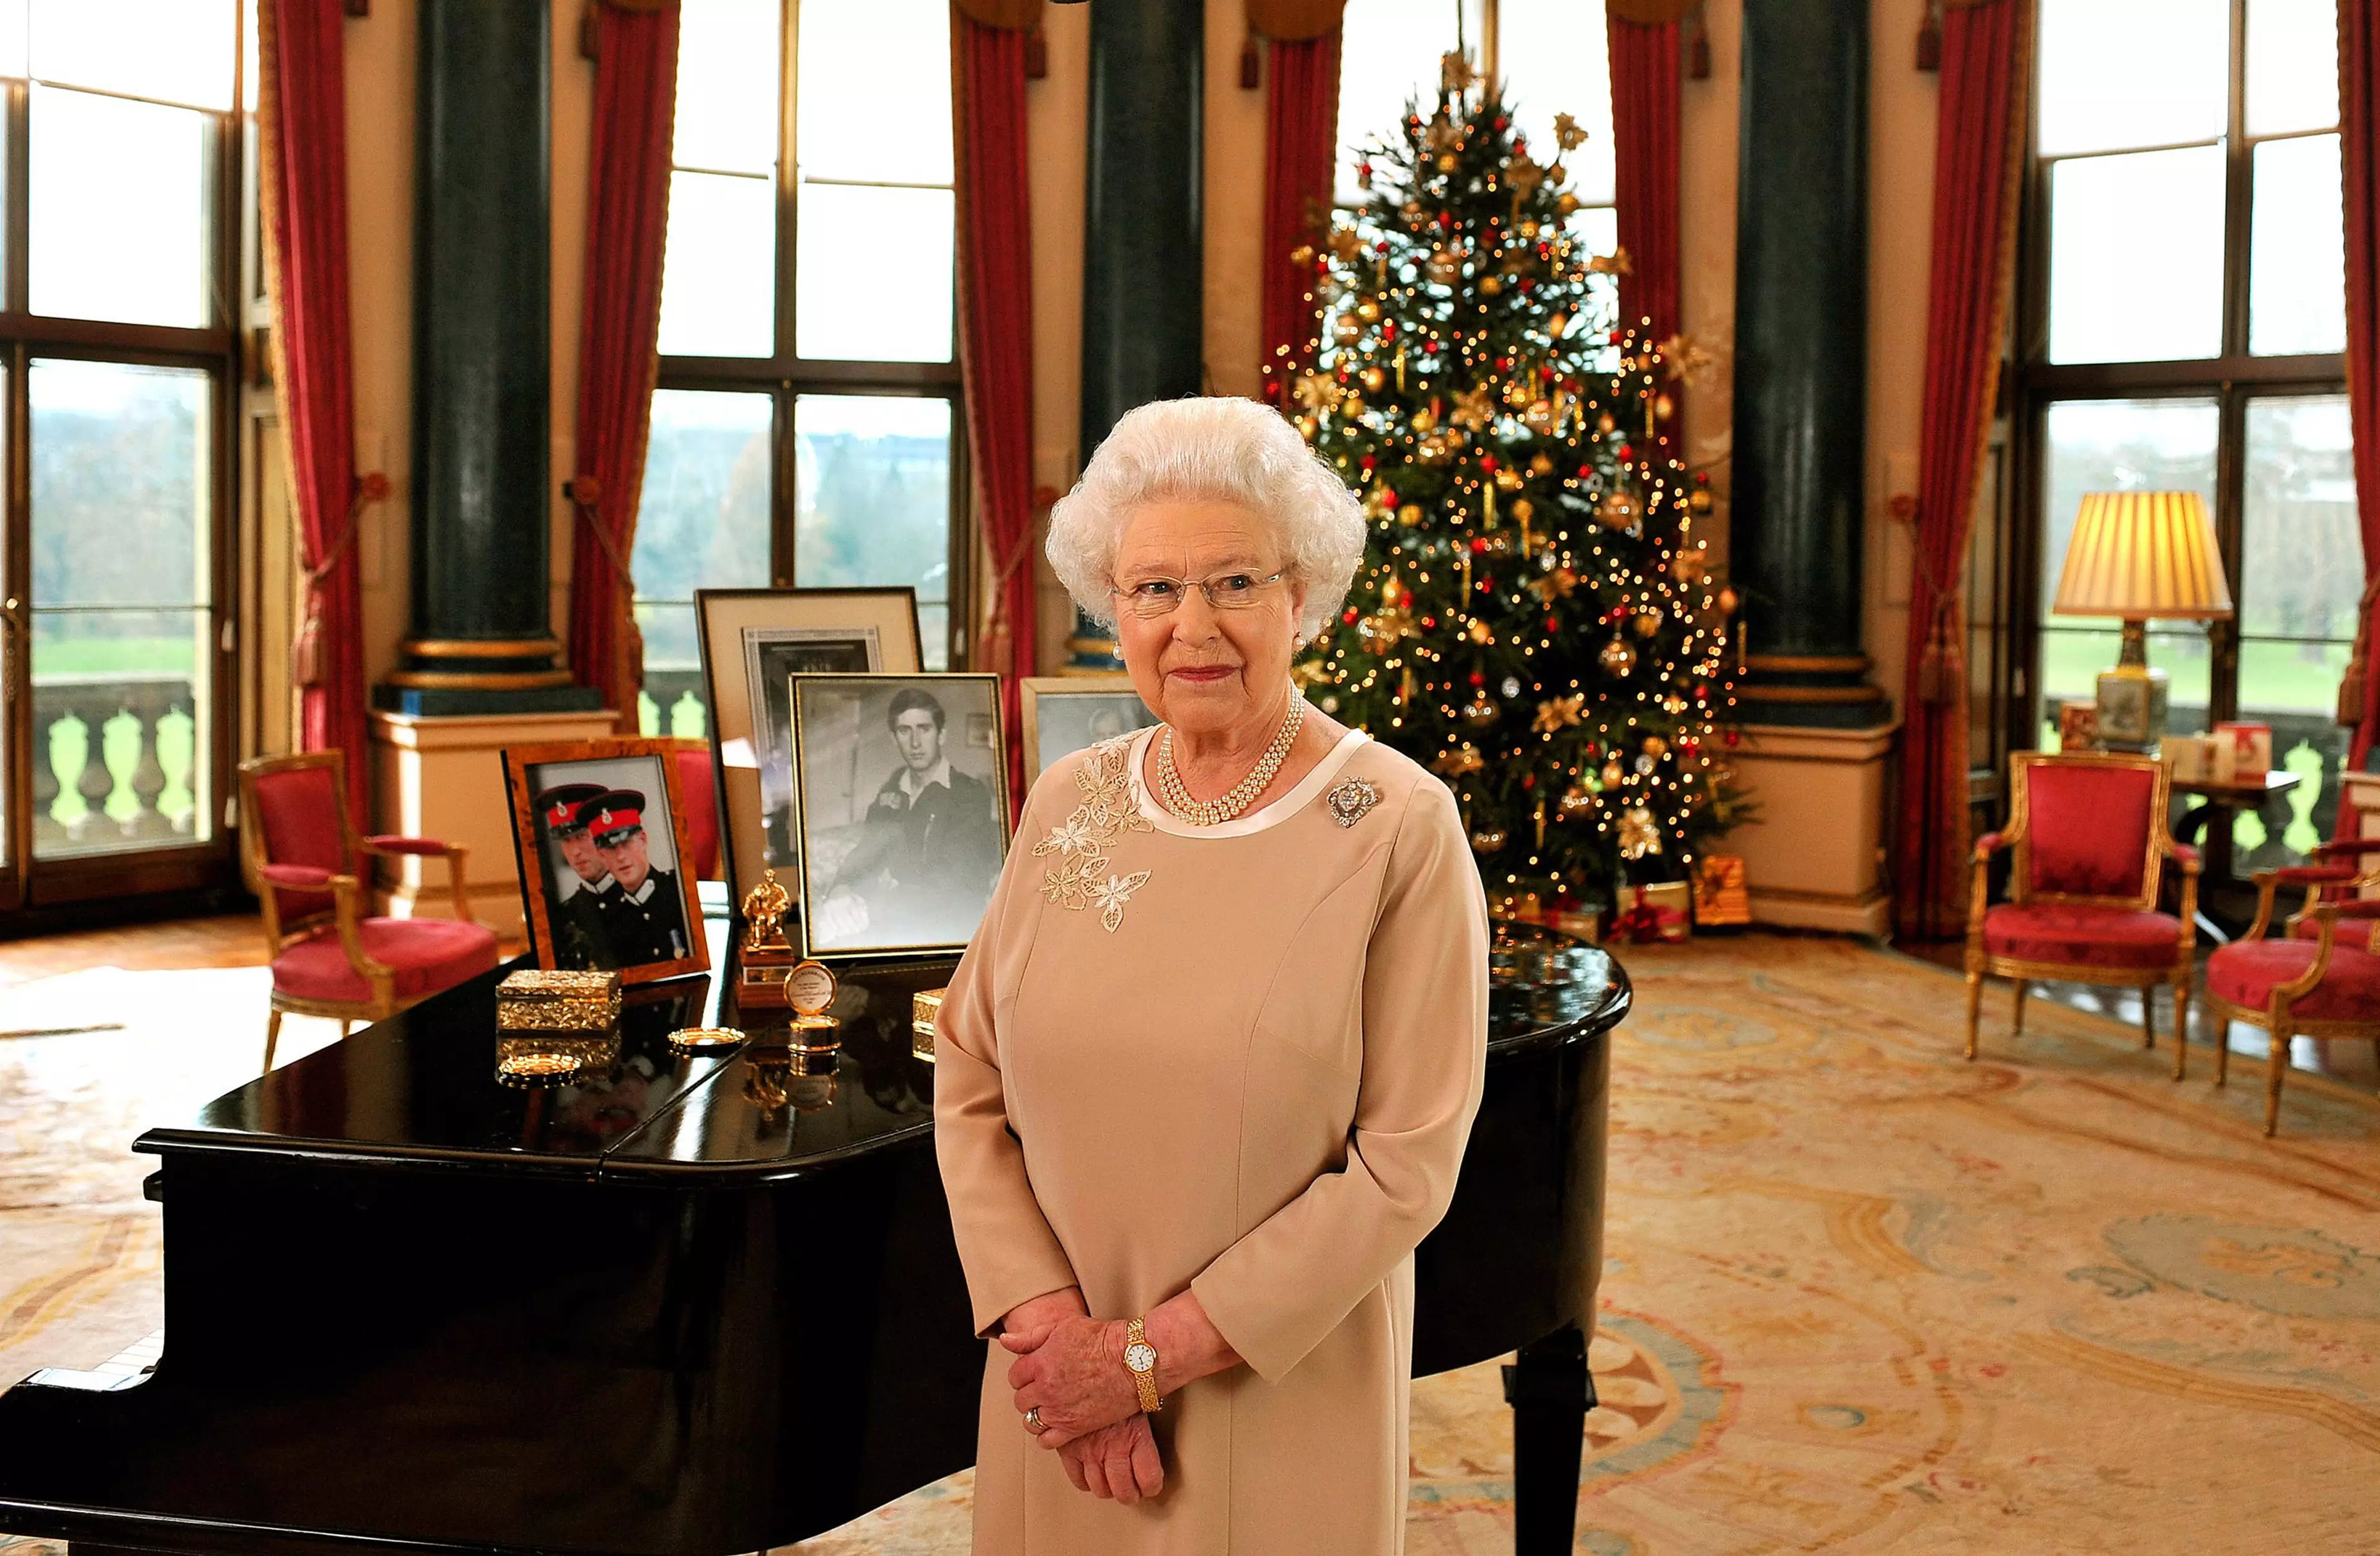 The Queen gives a speech every Christmas (